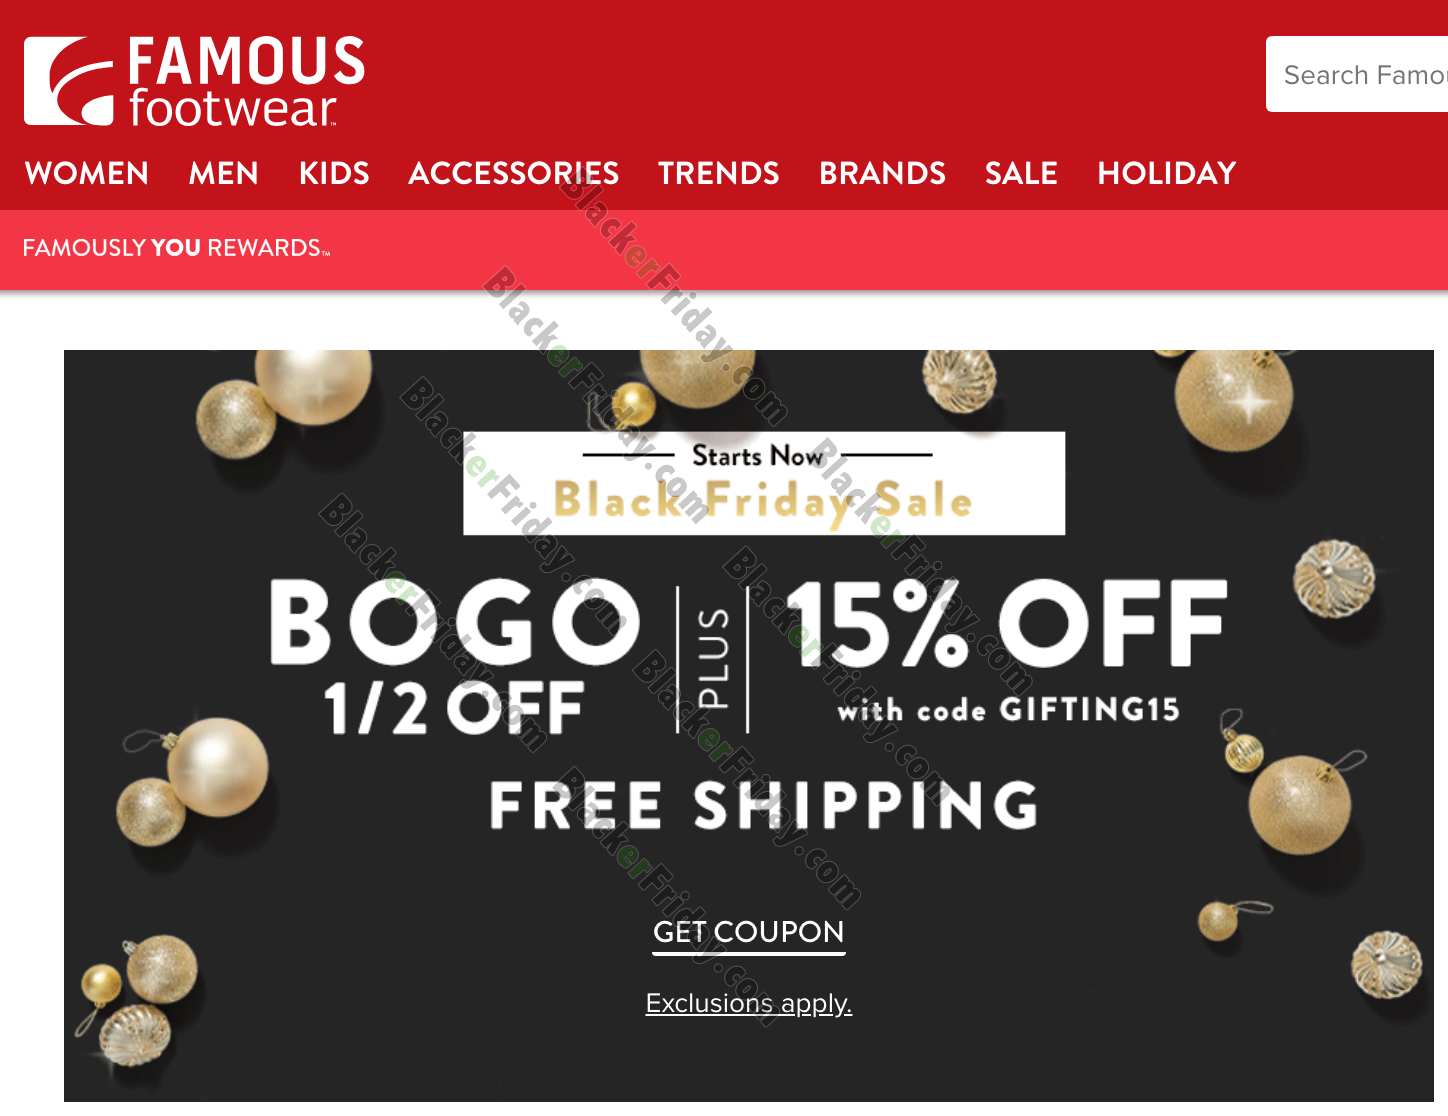 Famous Footwear Coupons and Sales